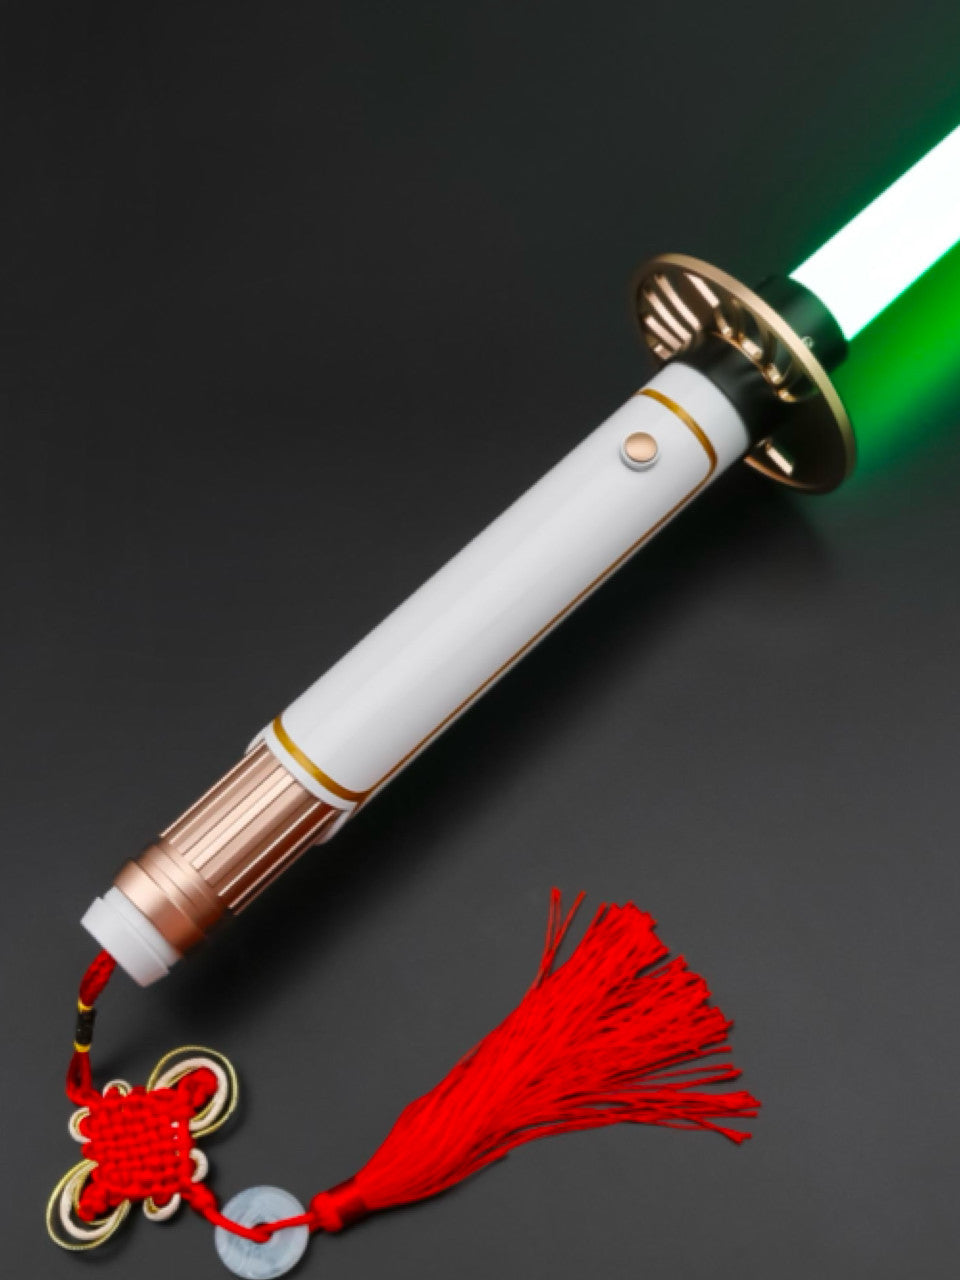 THE EDGE OF ASI LIGHTSABER